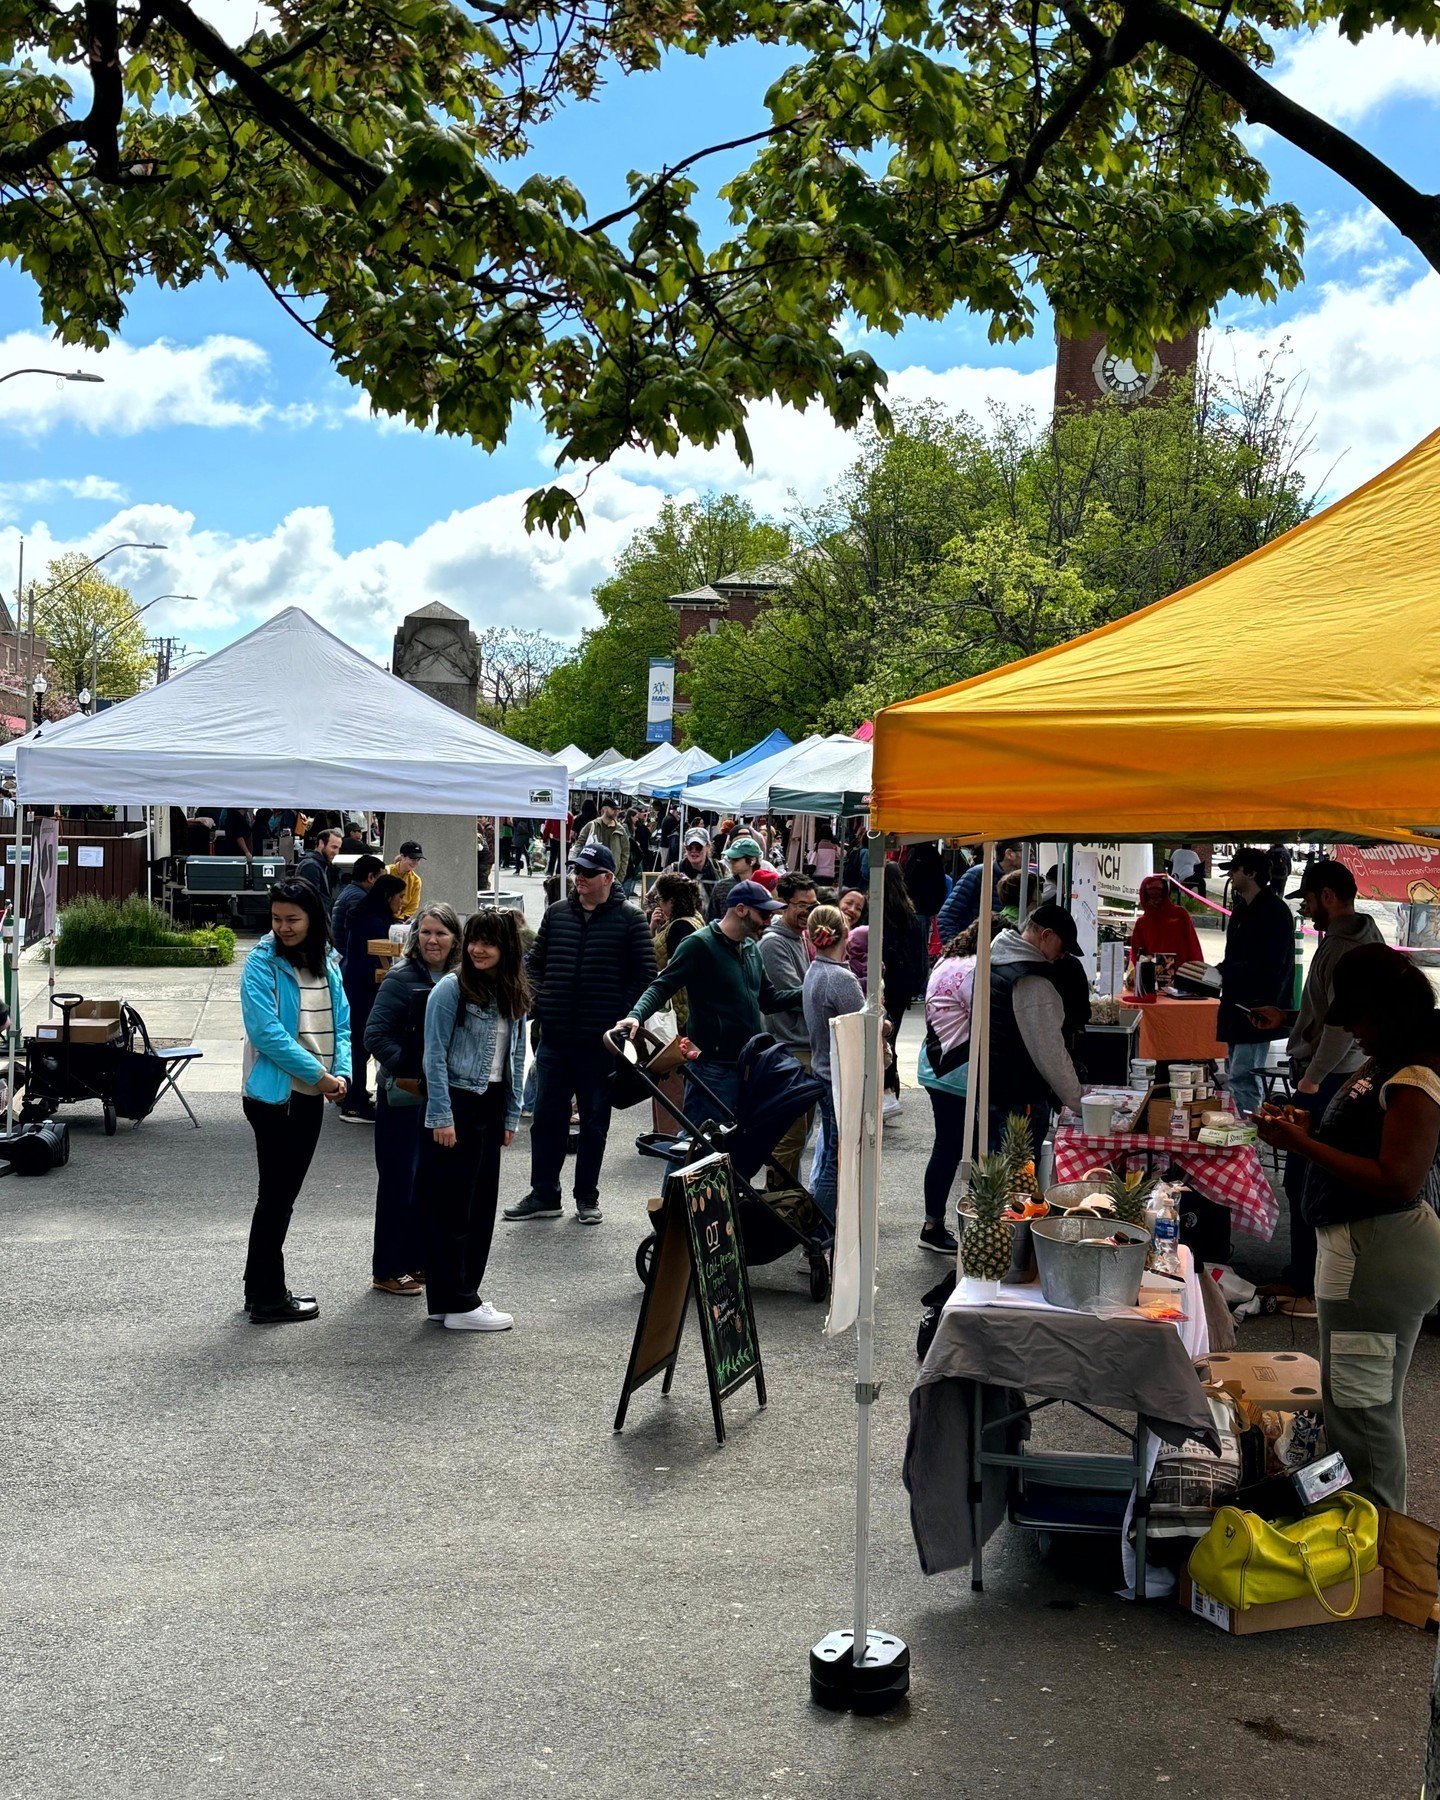 What a fantastic opening day! 👏👏👏

Thanks to all the #FarmersMarketFriends, volunteers, vendors, and music-makers who made the kick off to USFM's 20th season one for the books 🎊📚

Here's to a season of full bellies and full shopping bags! Can't 